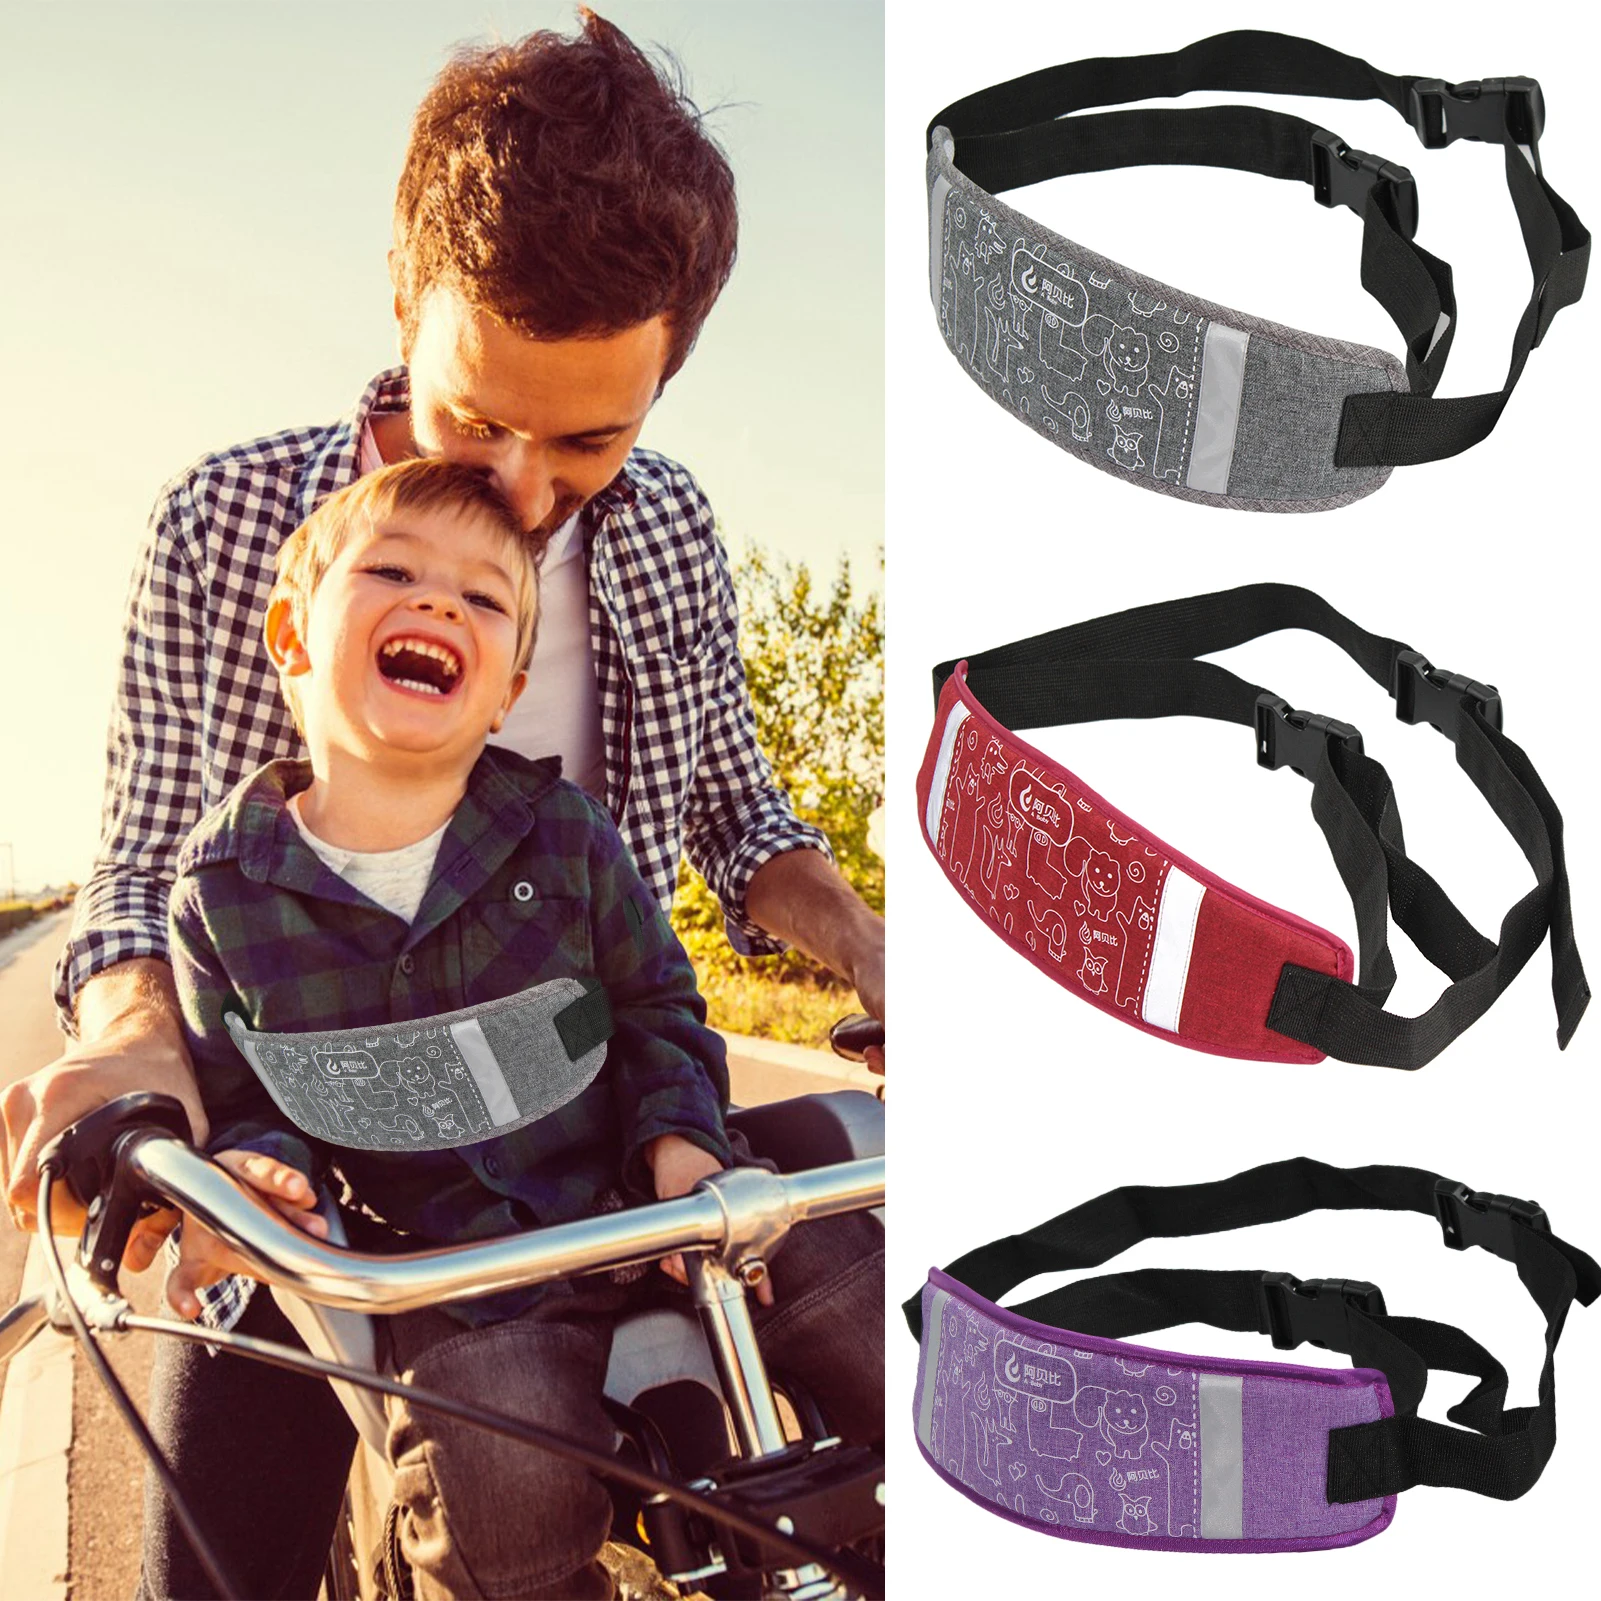 

Kids Motorcycle Harness Non-stuffy Motorcycle Safety Belt Safe Driving With Reflective Design Non-Slip Strap Universal